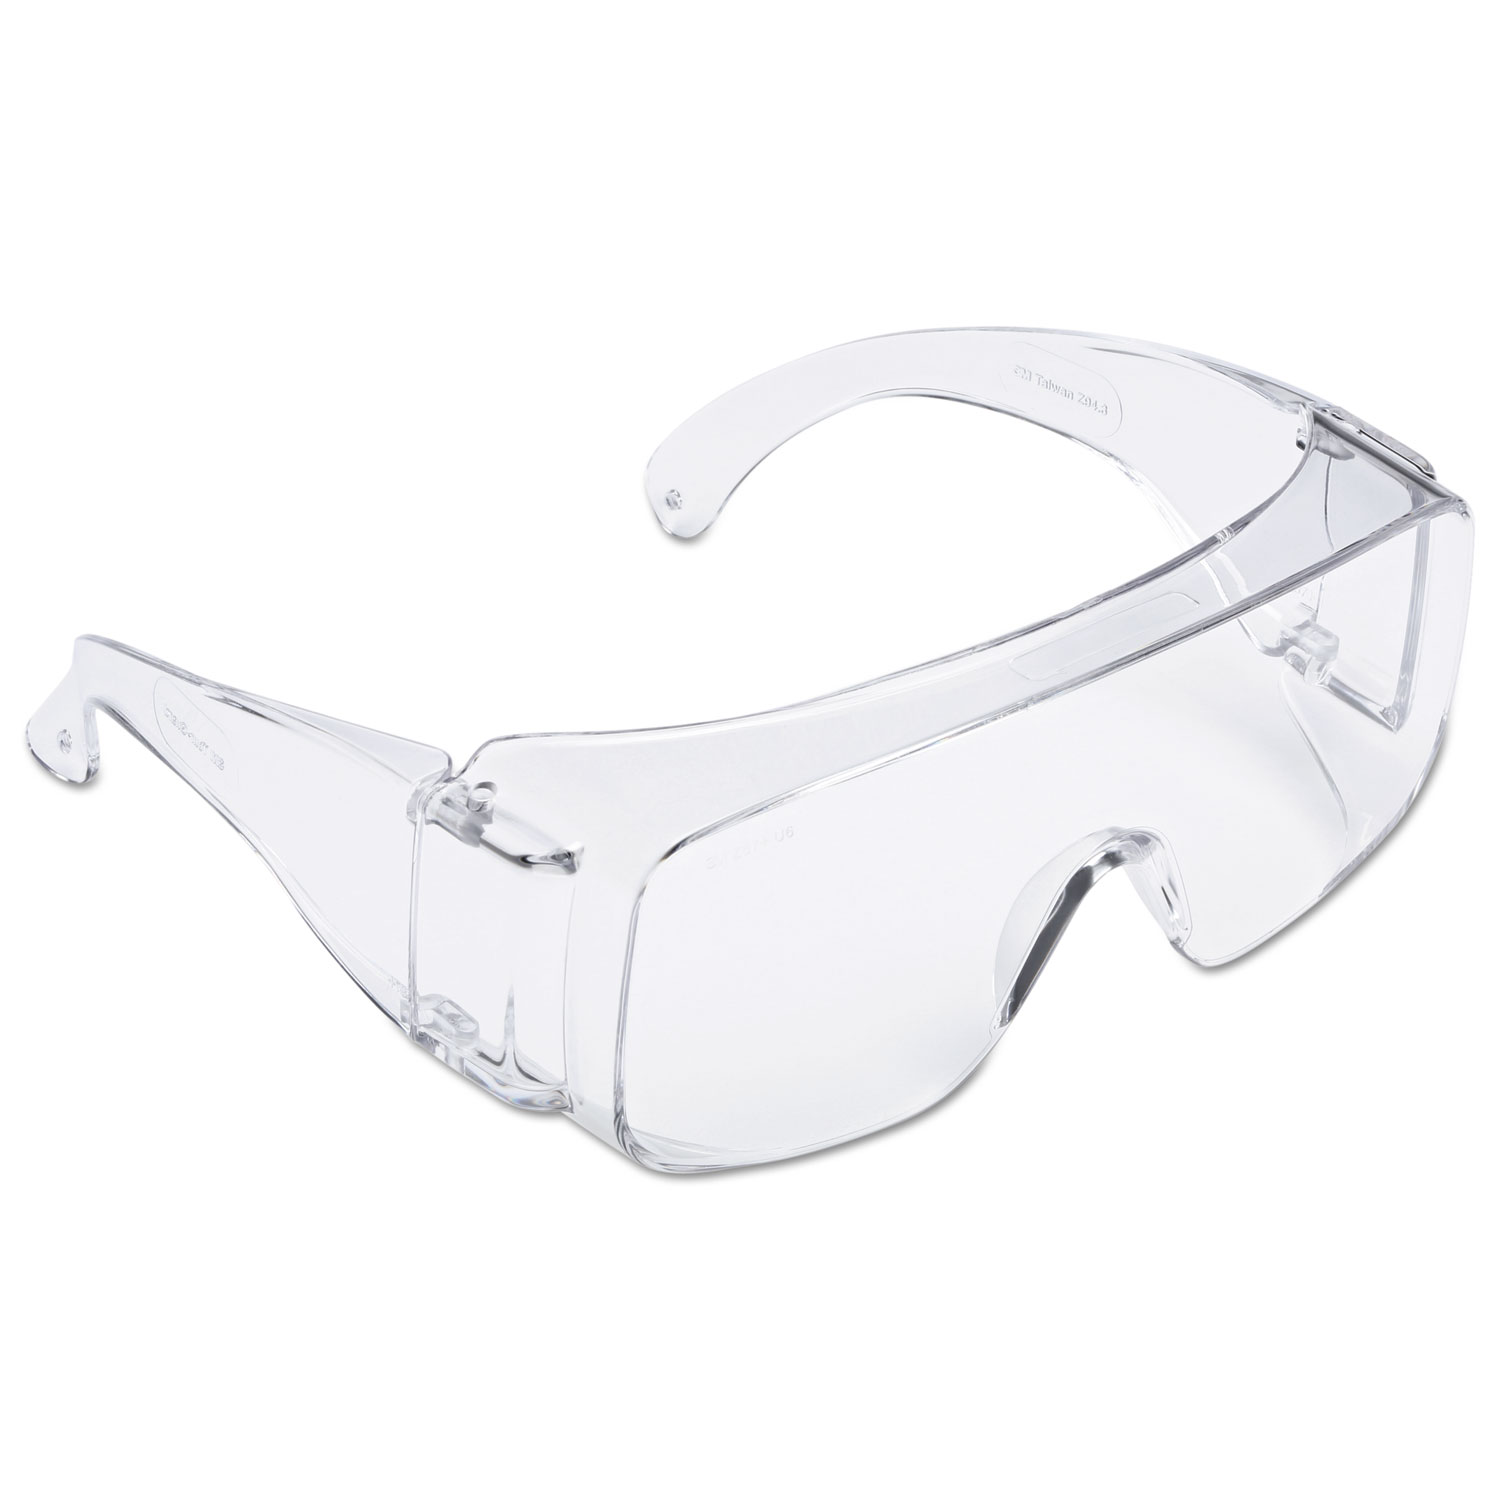  3M TGV01-20 Tour Guard V Safety Glasses, One Size Fits Most, Clear Frame/Lens, 20/Box (MMMTGV0120) 